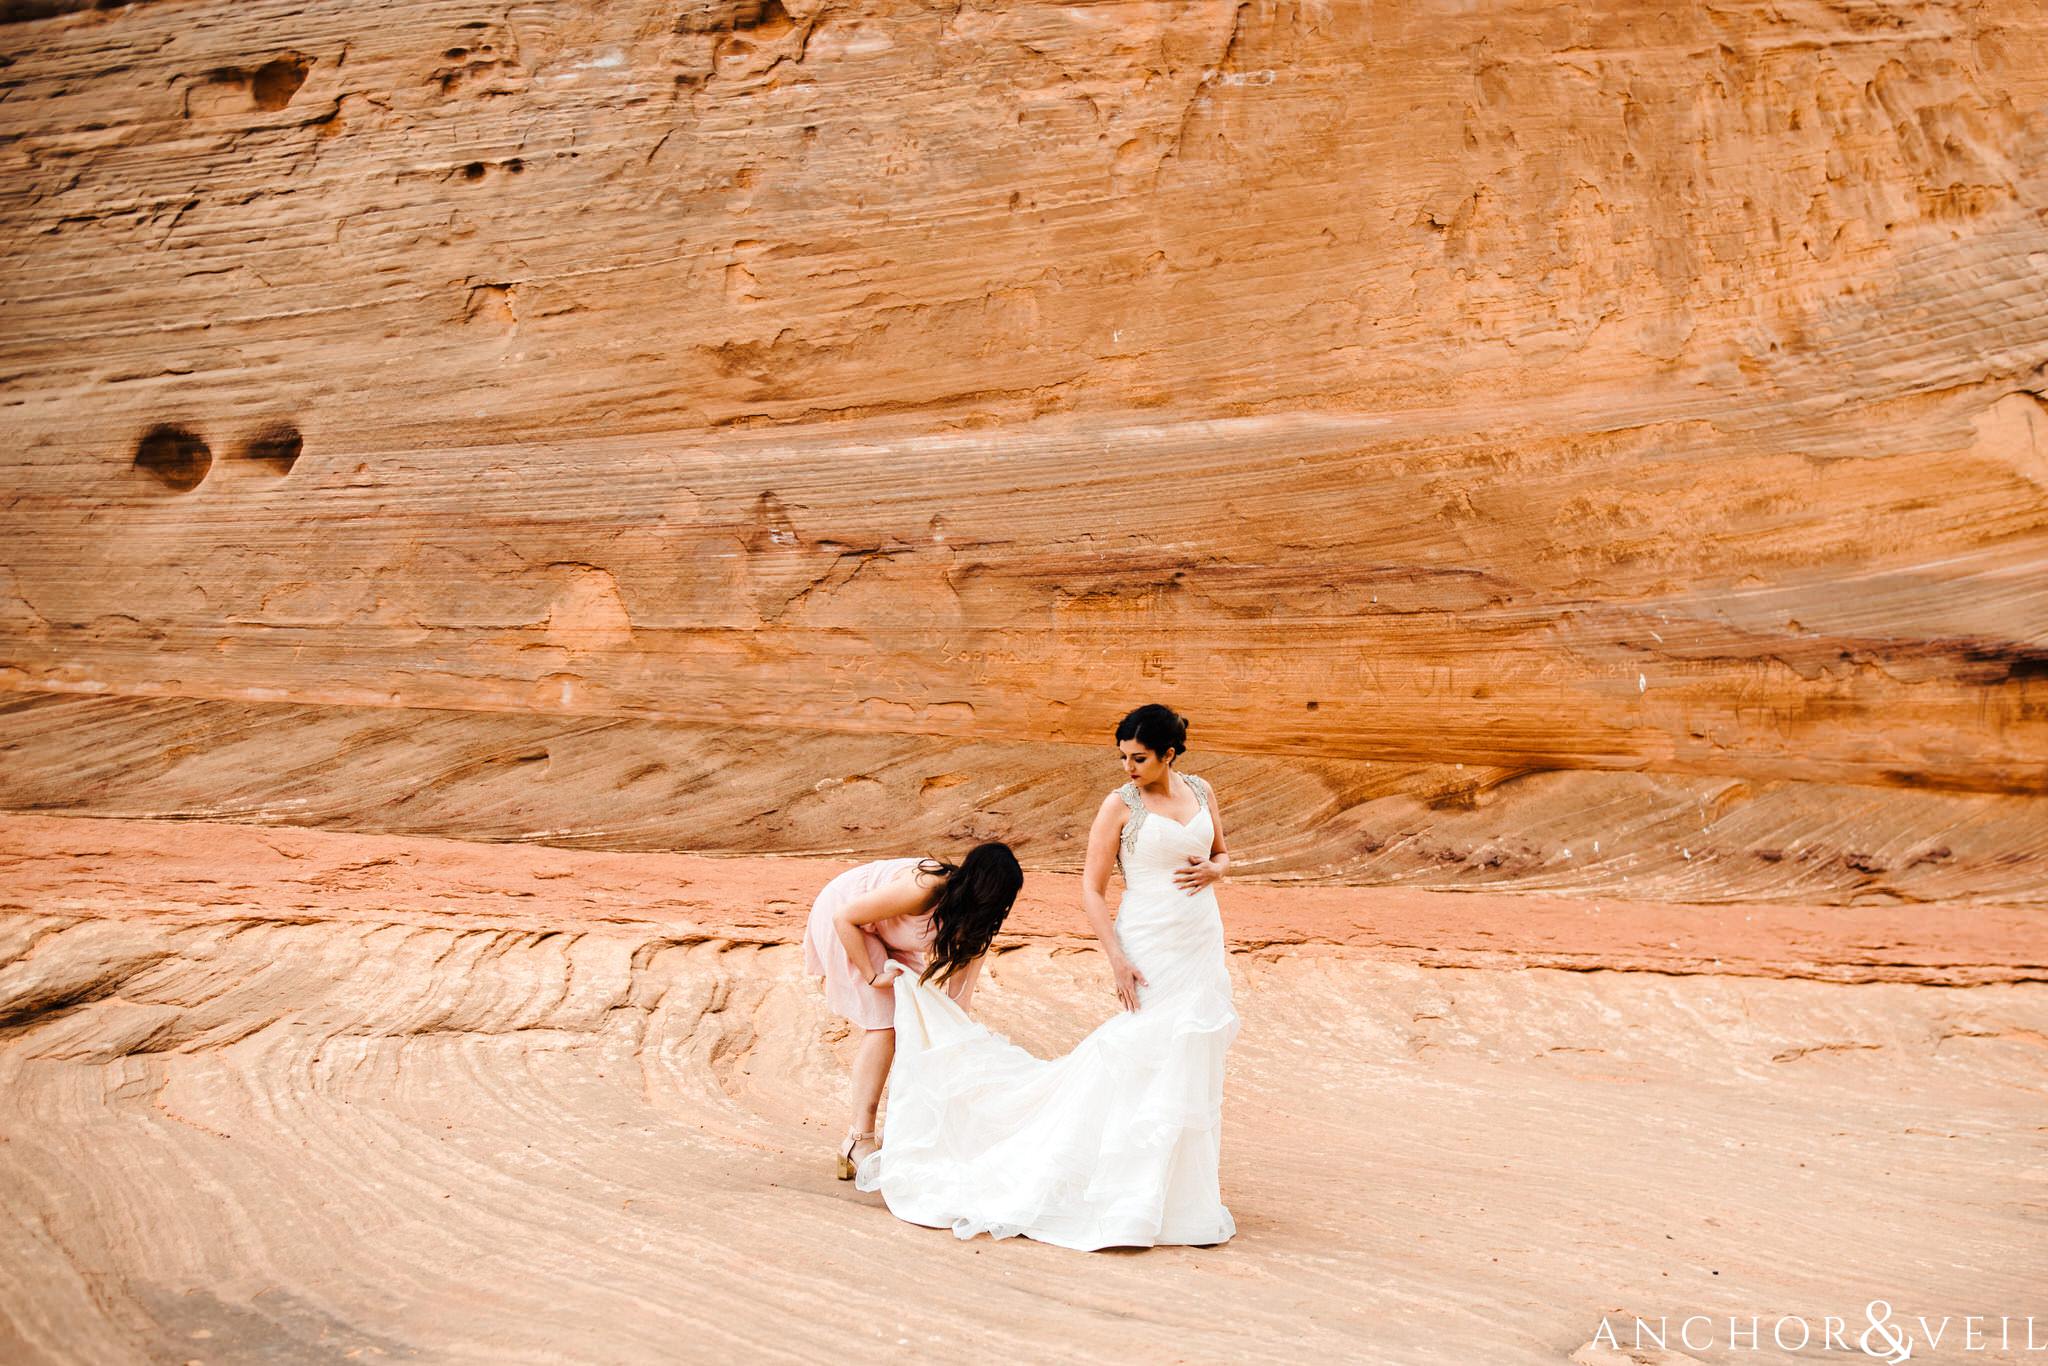 putting on the dress during their Horseshoe Bend Elopement Wedding